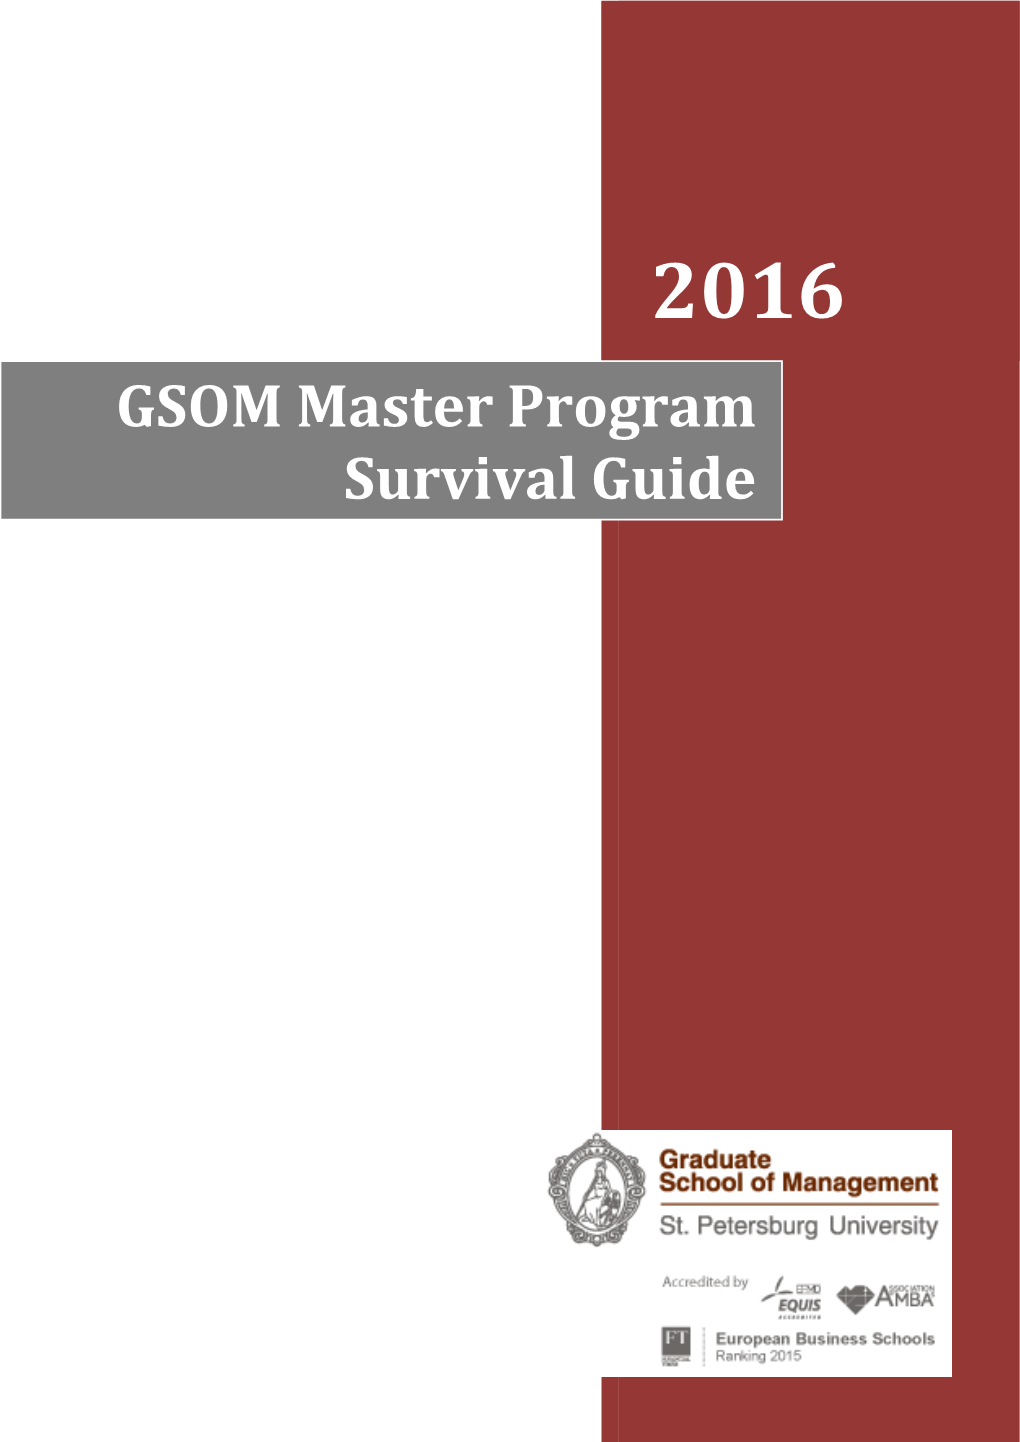 GSOM Master Program Survival Guide WELCOME to the GRADUATE SCHOOL of MANAGEMENT!